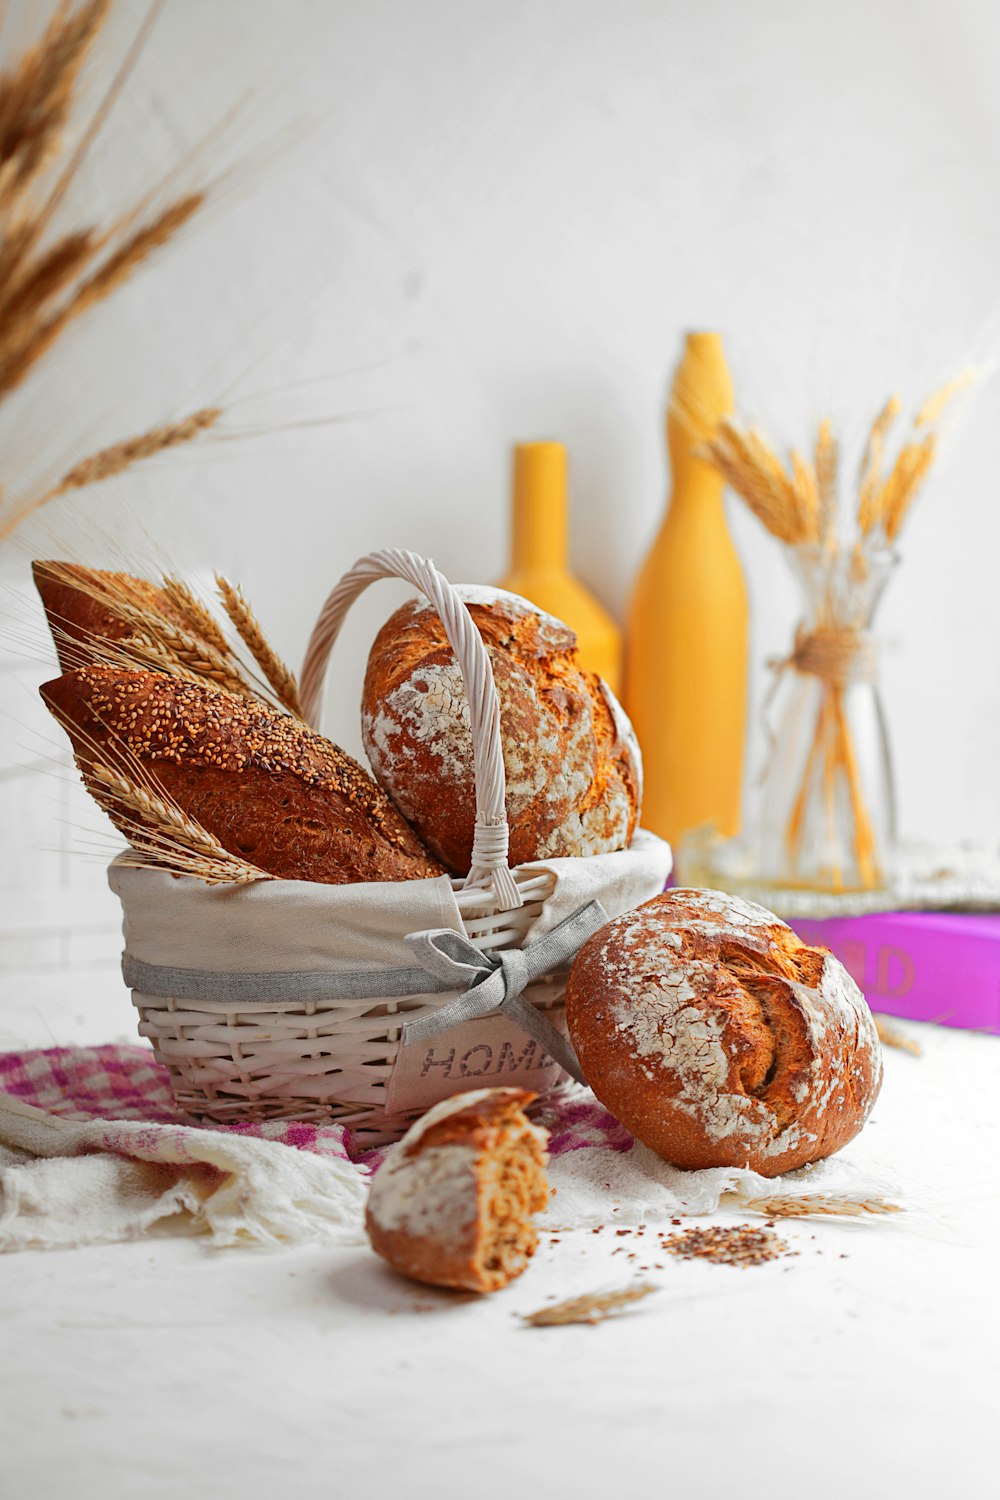 brown and white doughnuts on white basket